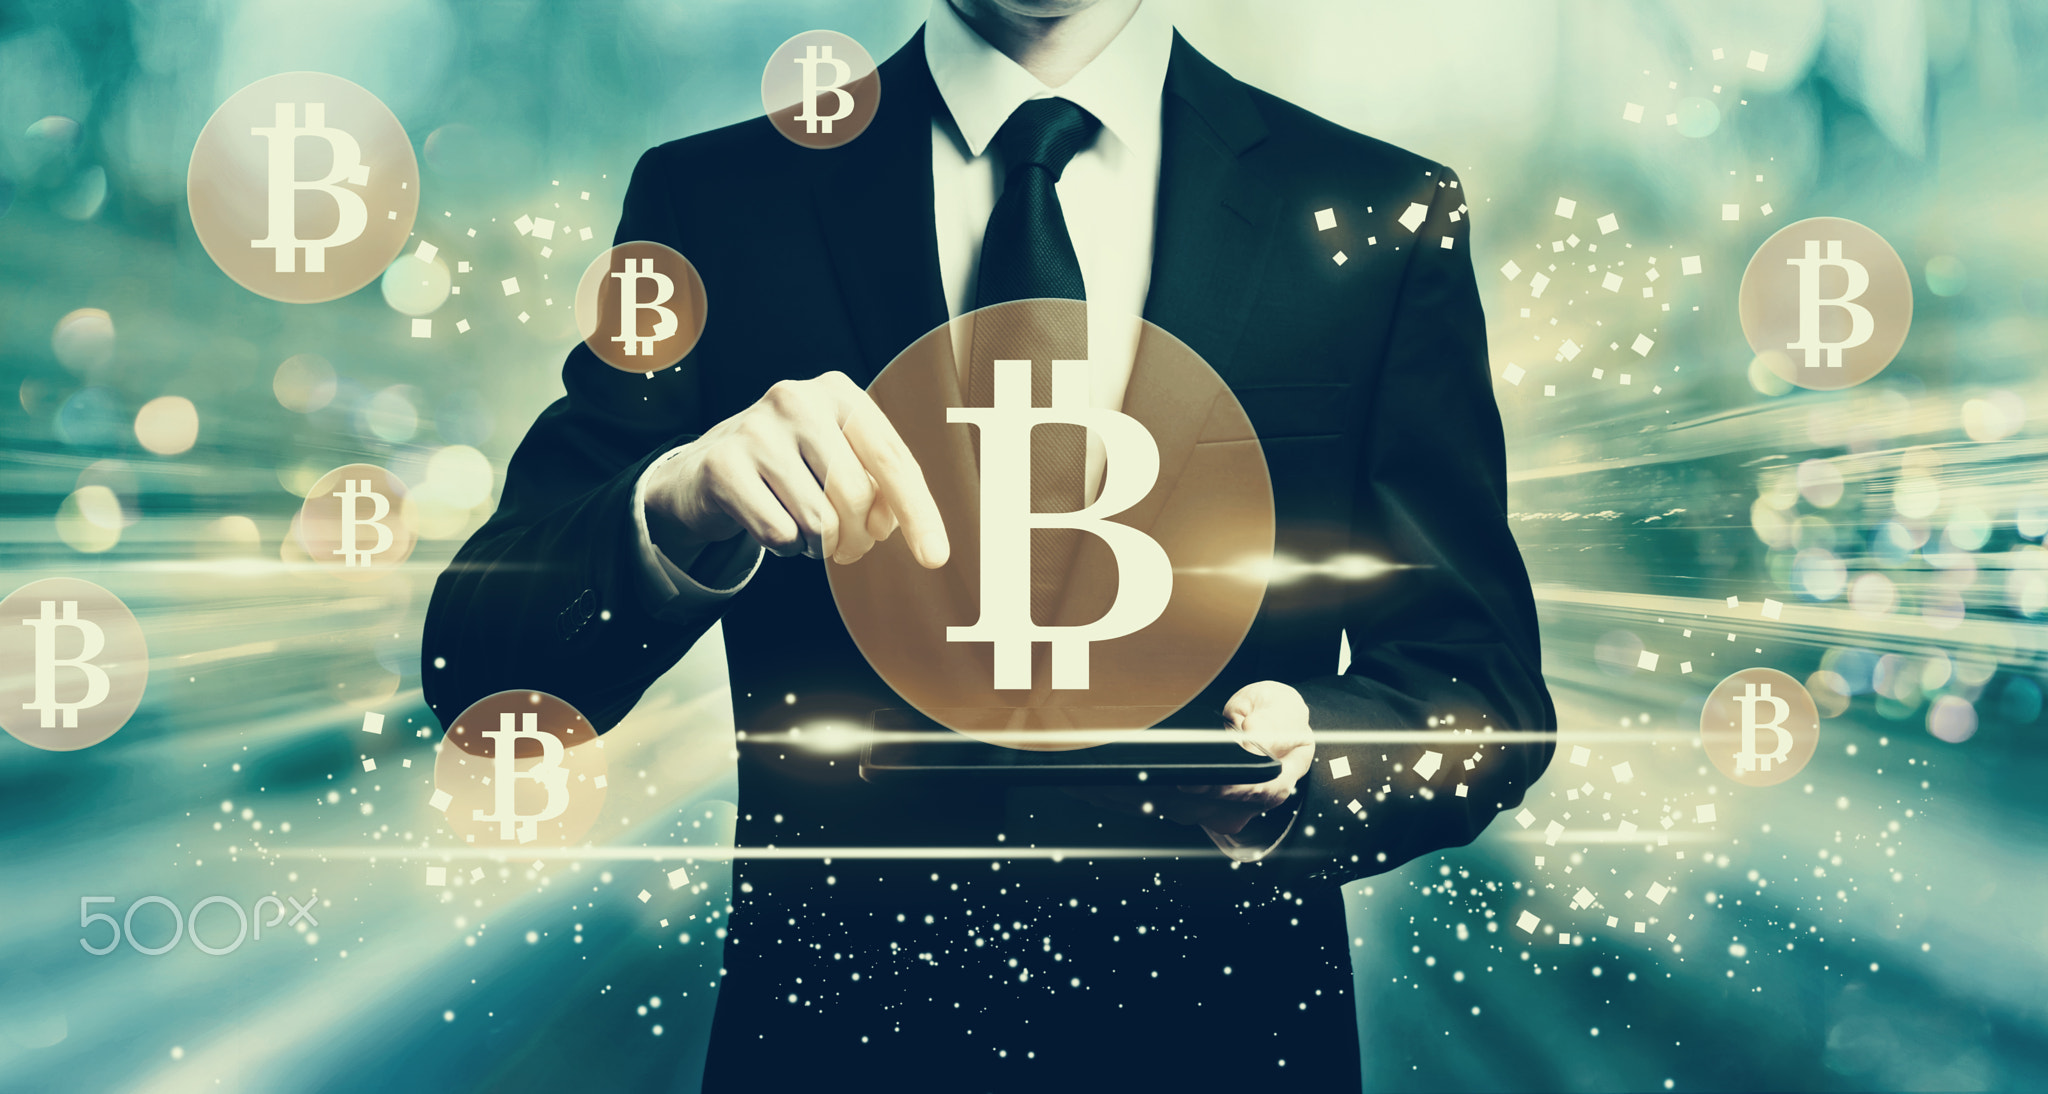 Bitcoins with man holding a tablet